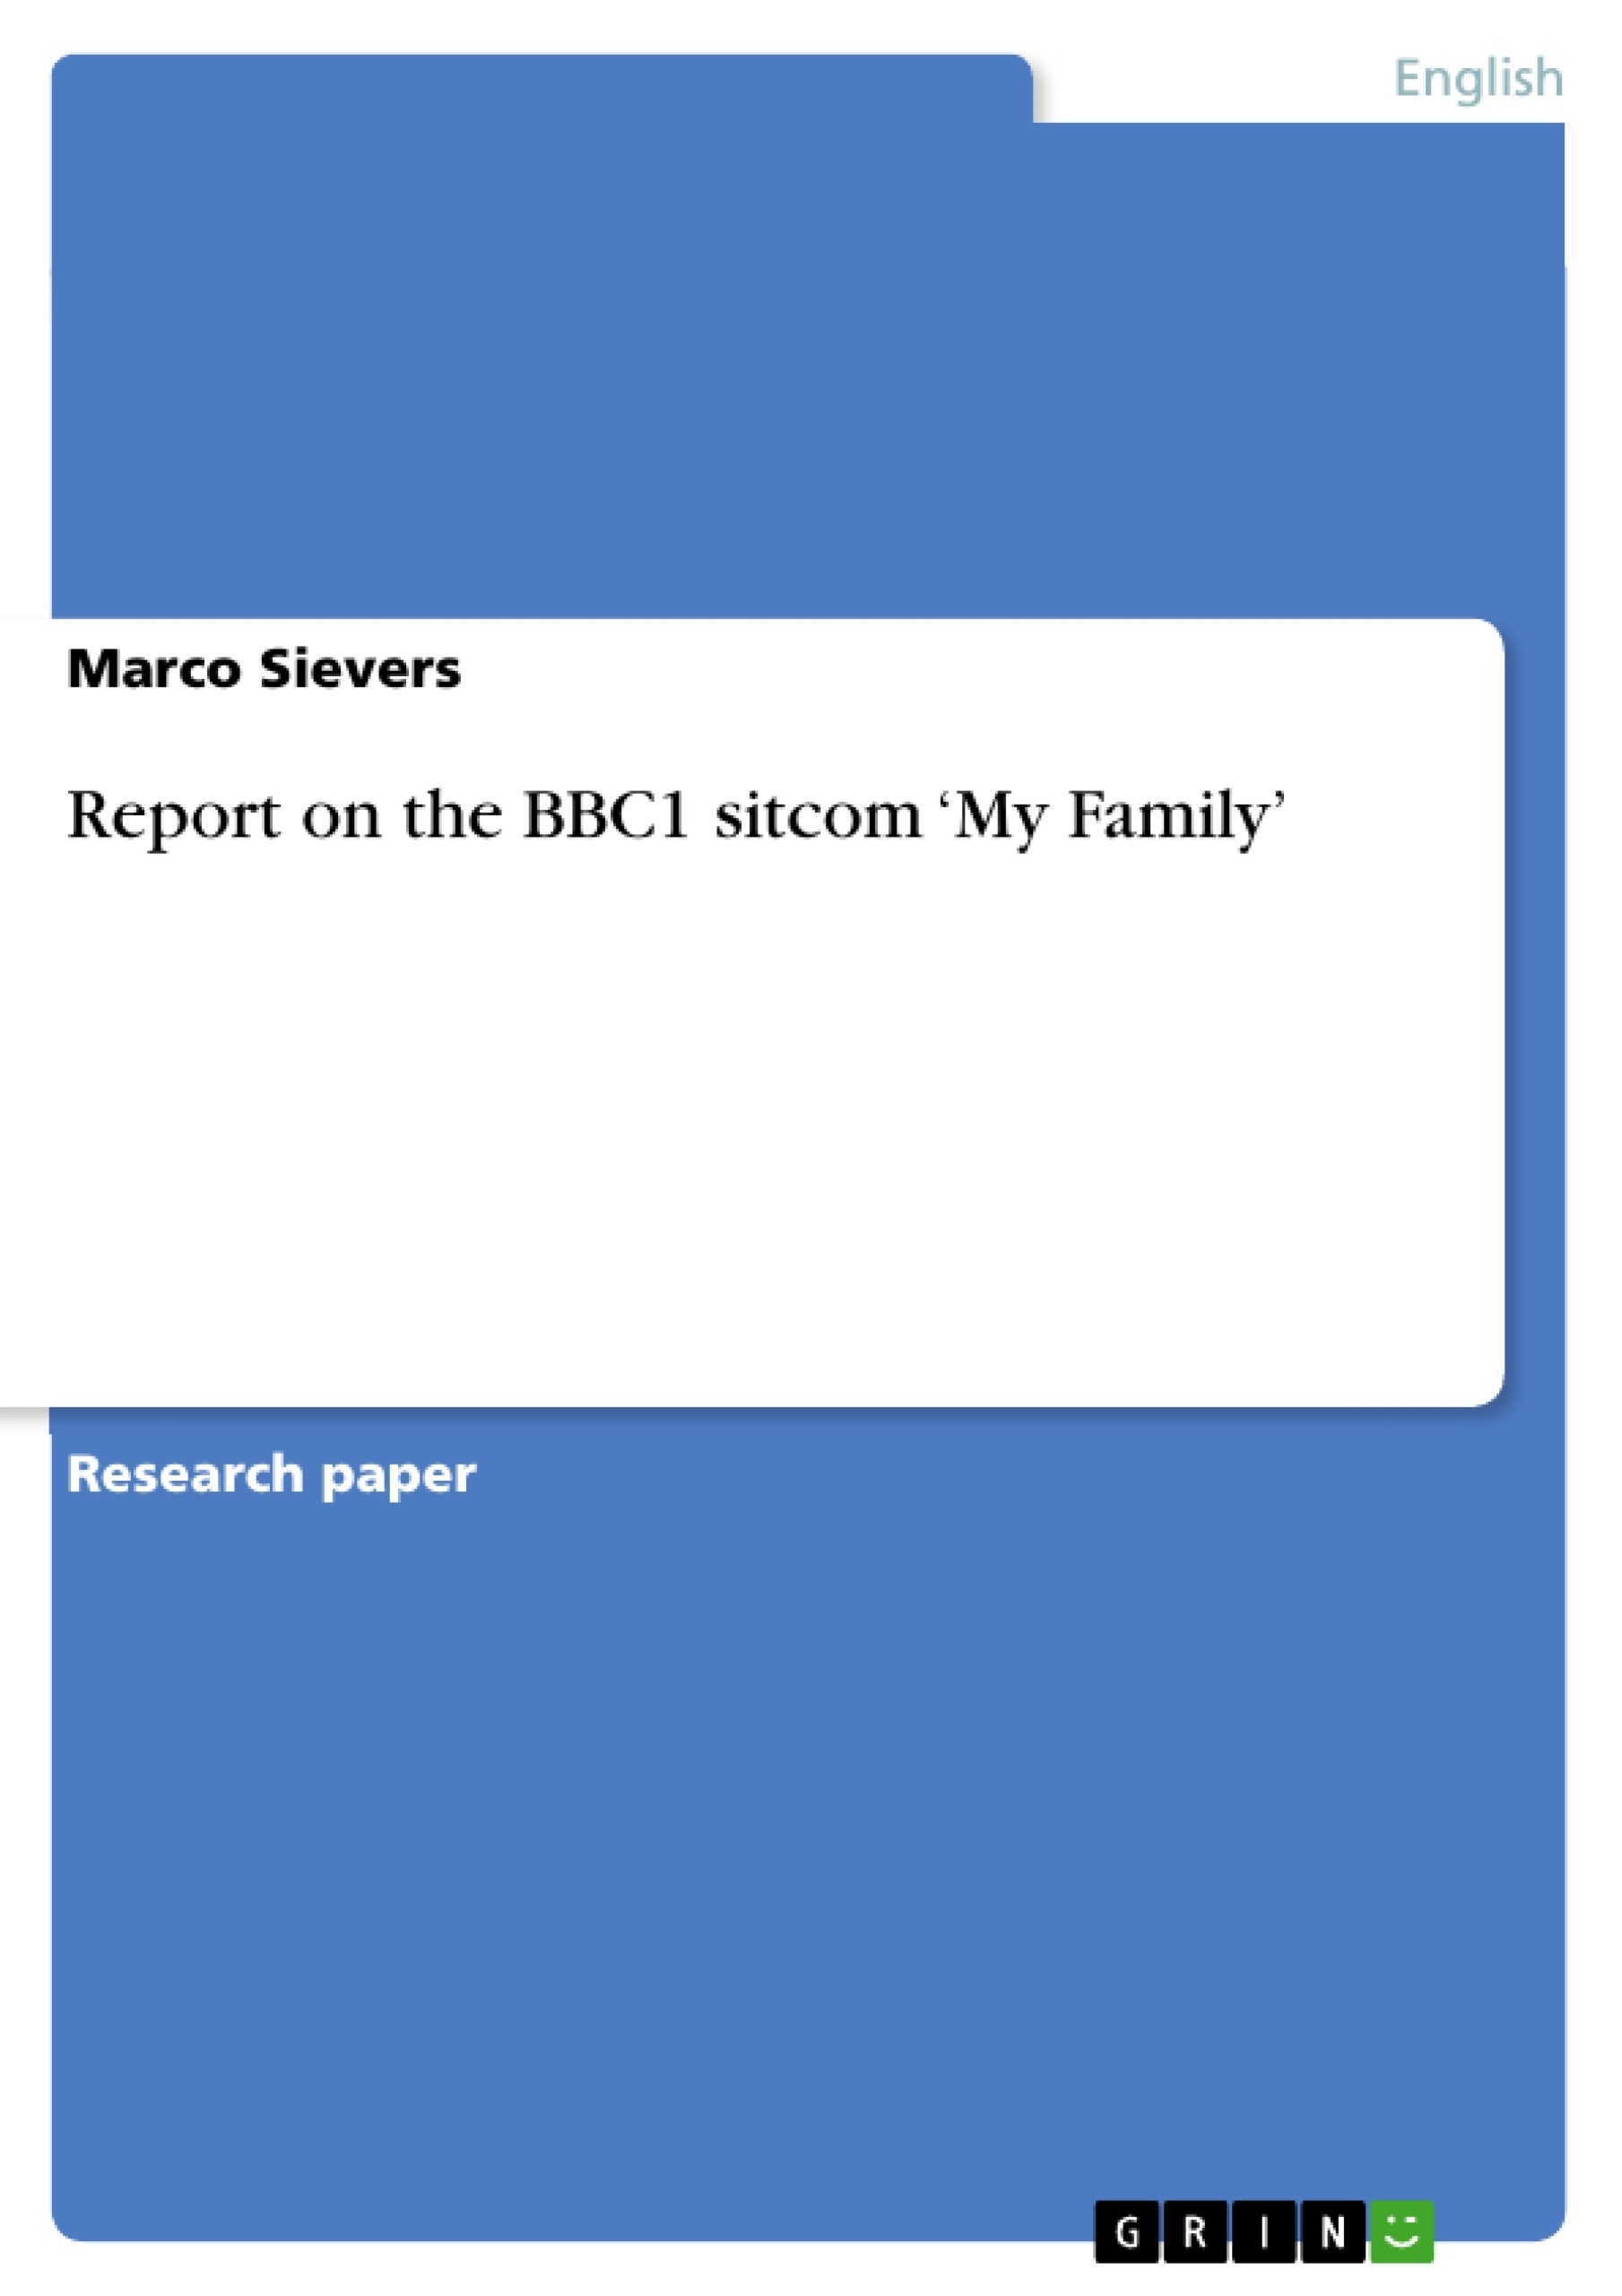 Title: Report on the BBC1 sitcom ‘My Family’